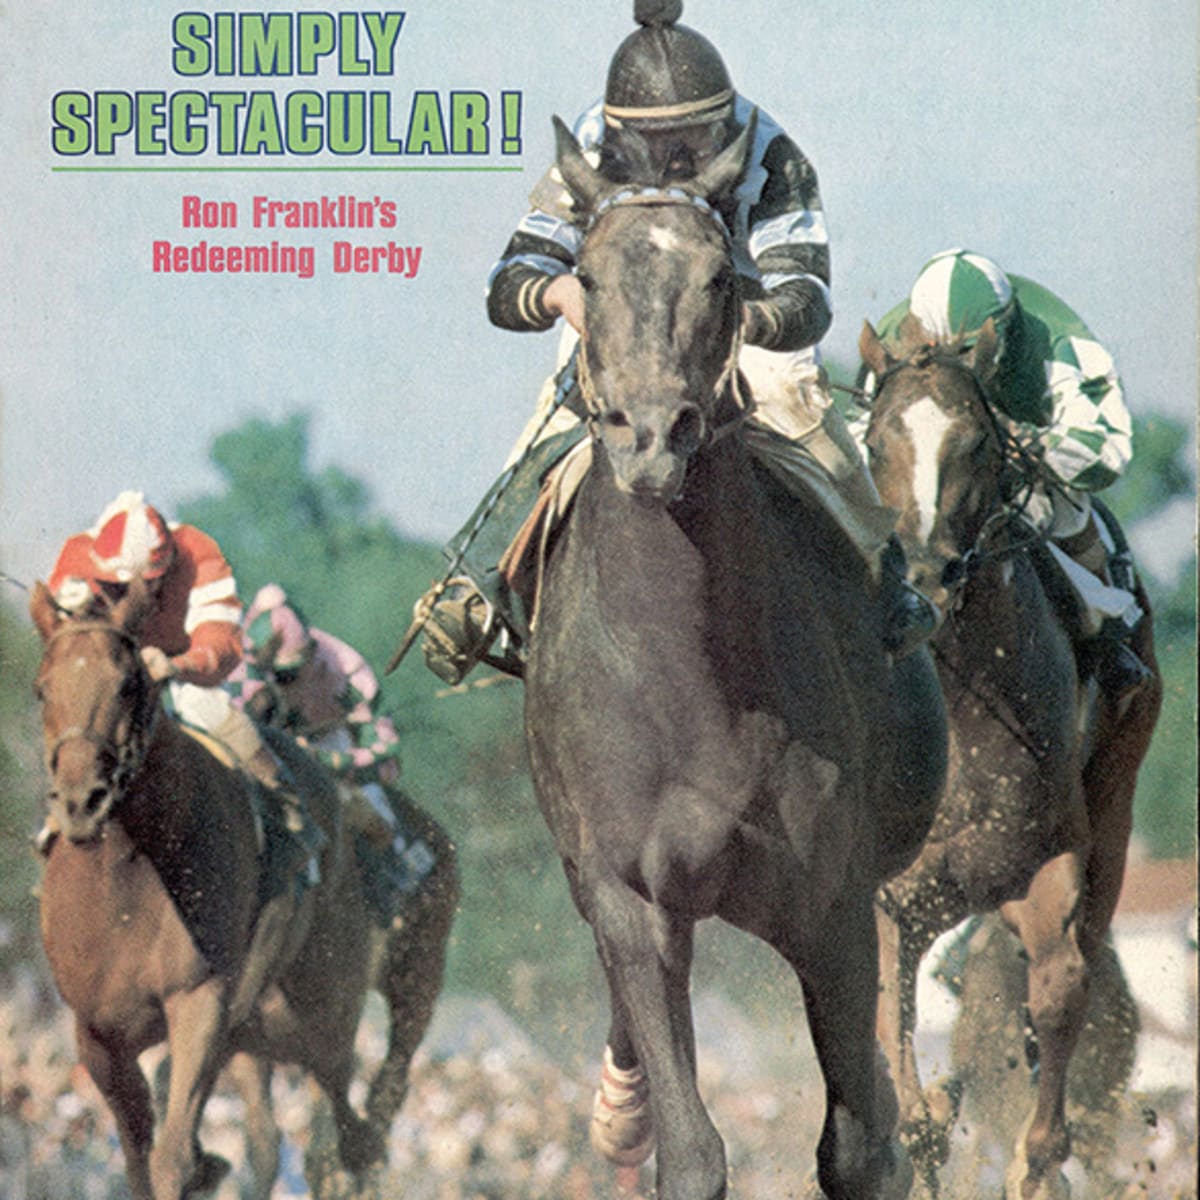 April 30, 1979 Table Of Contents - Sports Illustrated Vault